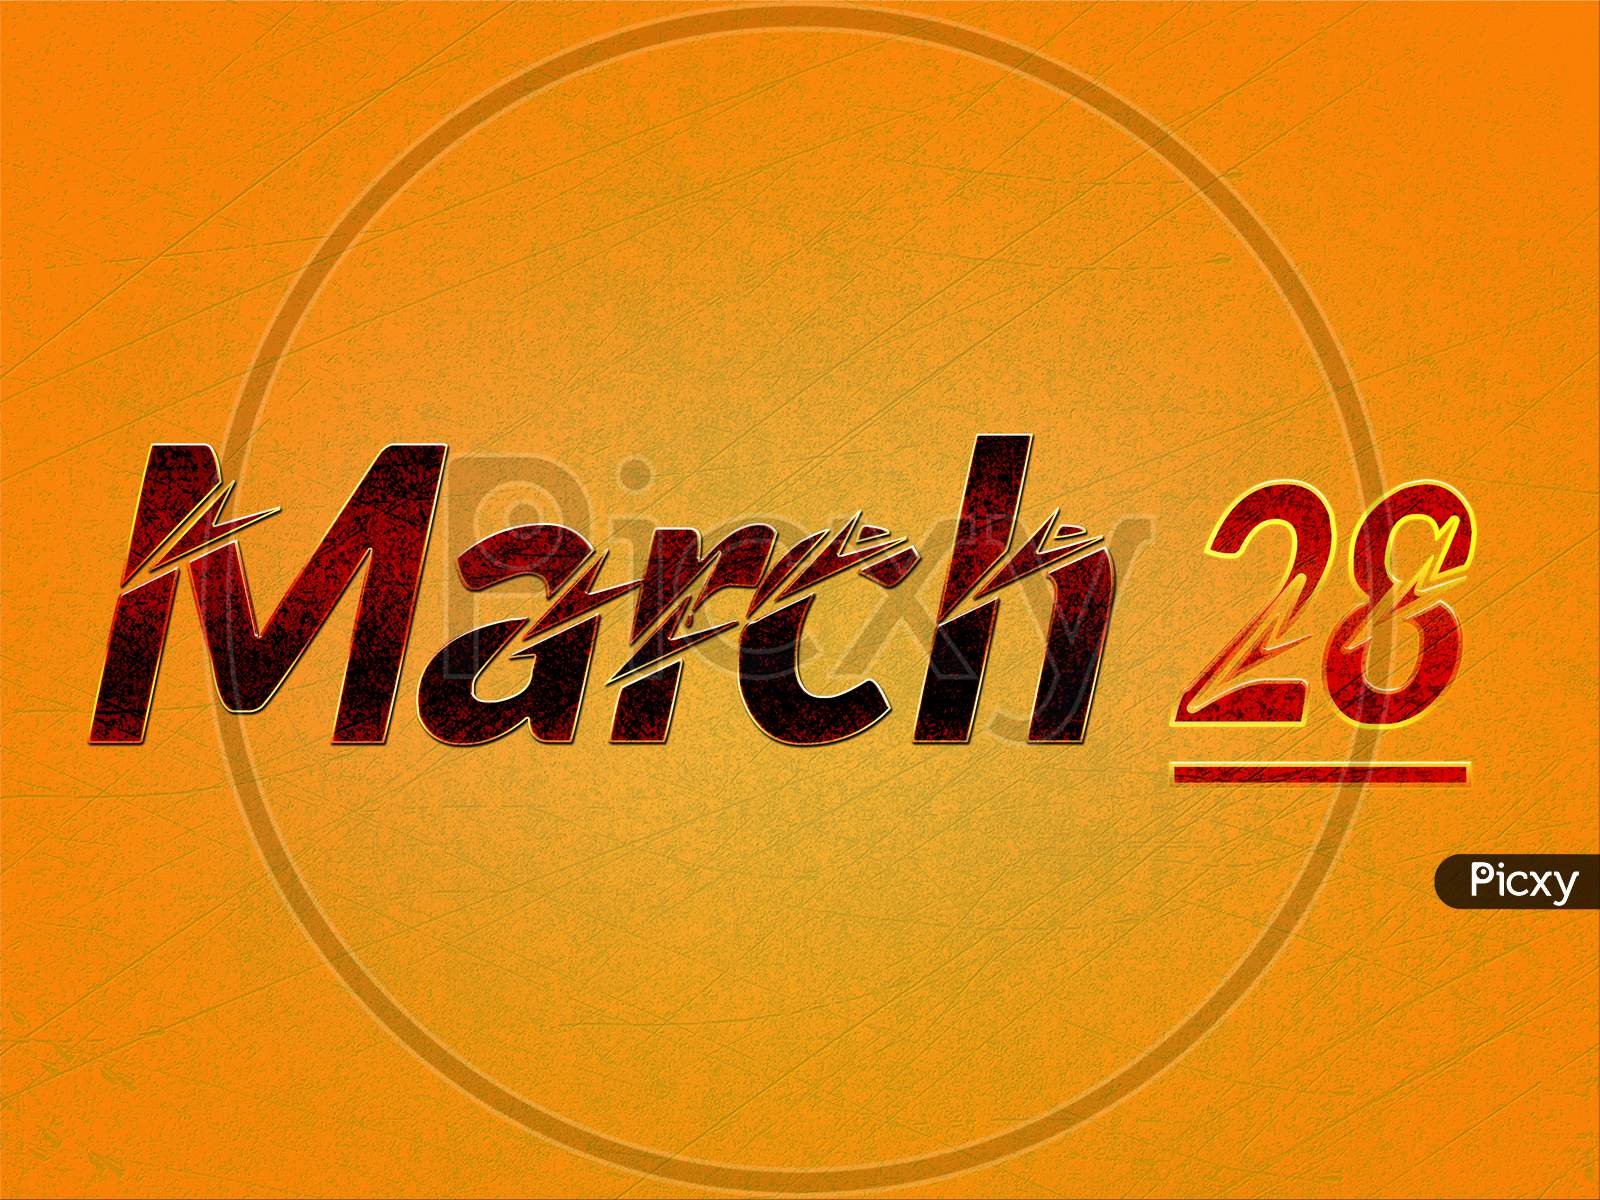 March 28